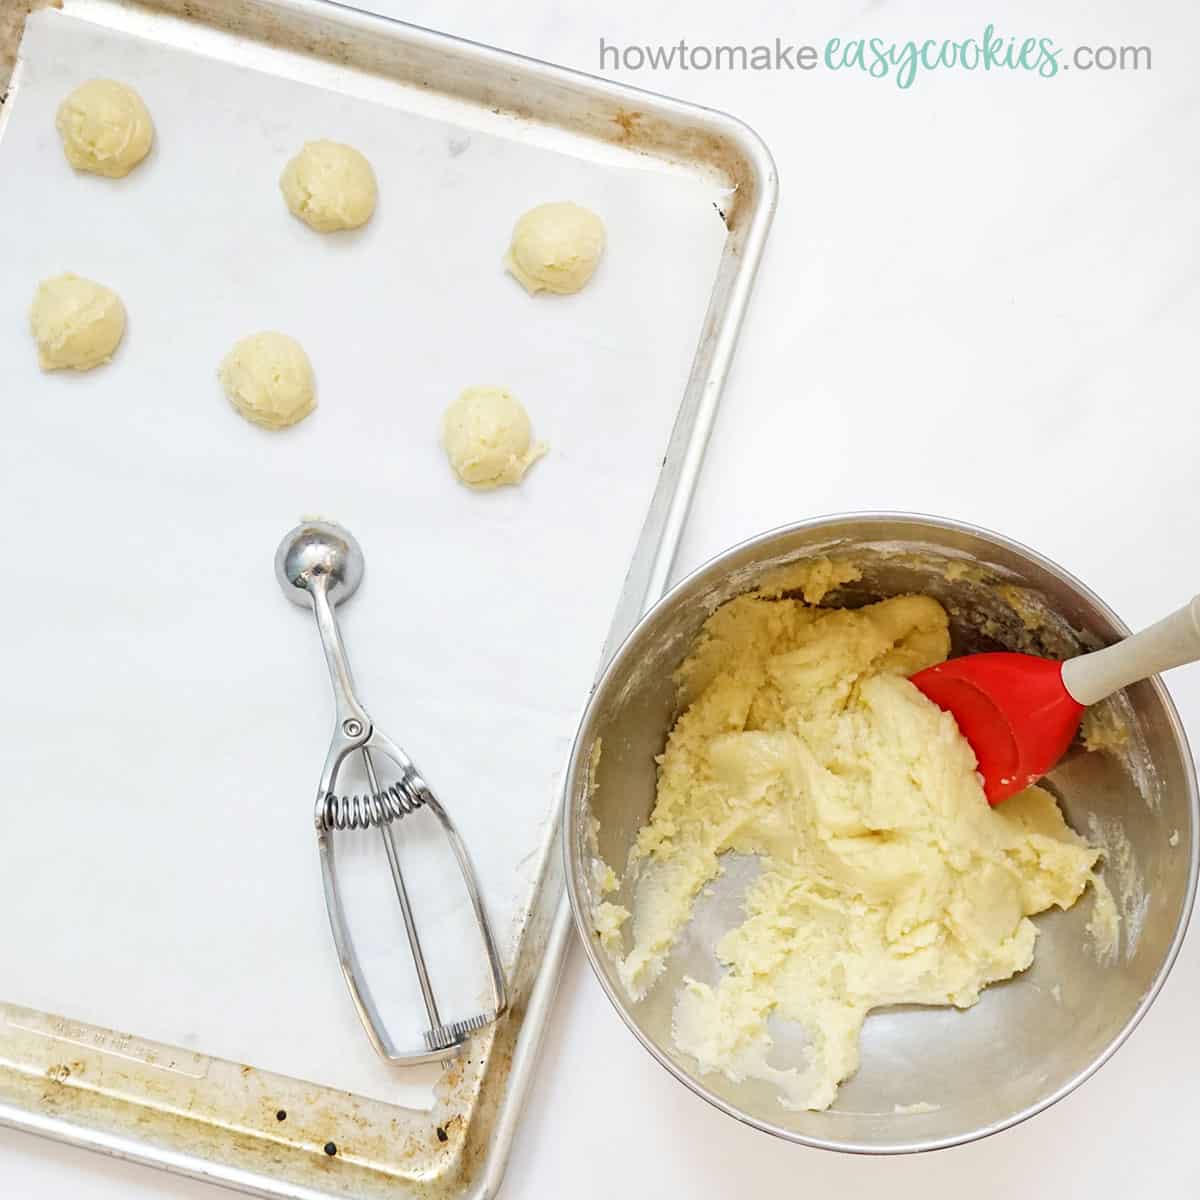 how to make cookies from white cake mix -- dough scooped on baking tray